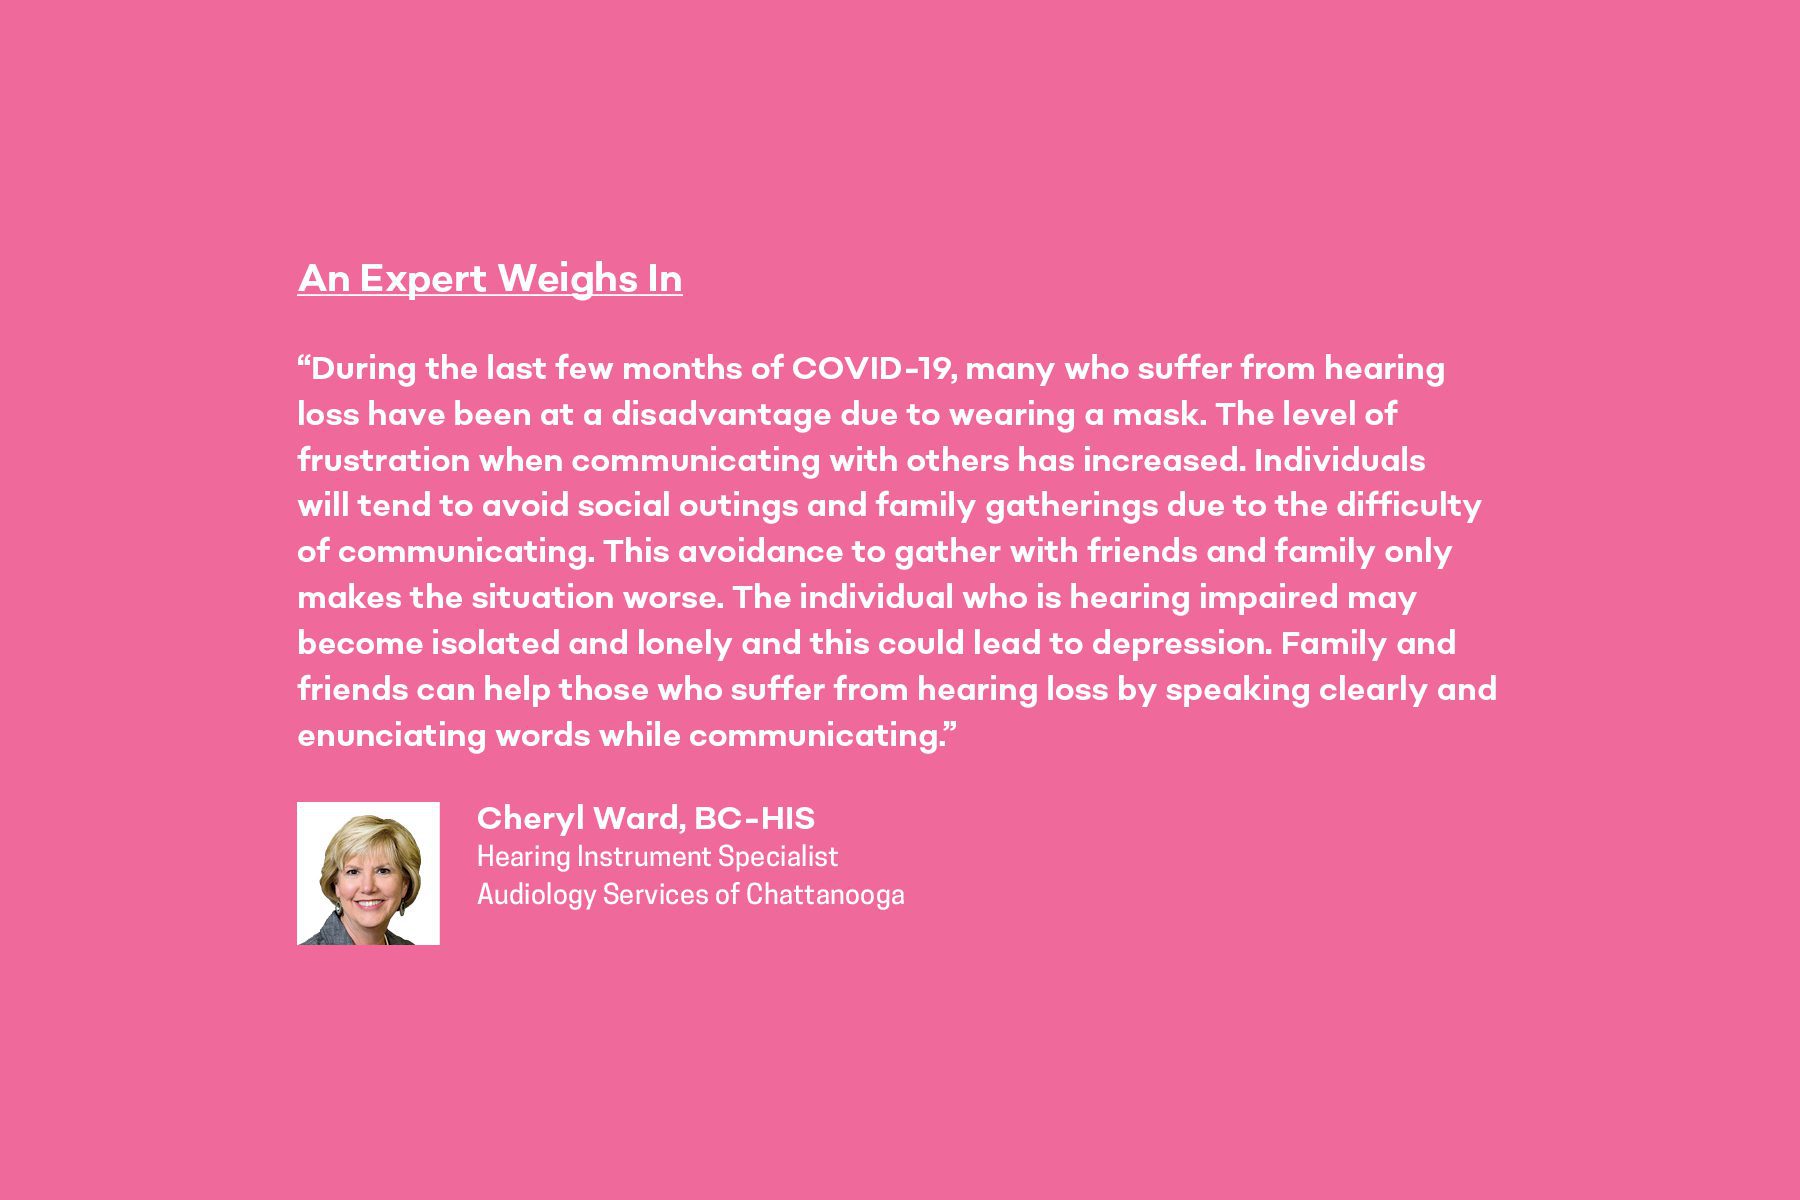 expert opinion on how to communicate with someone with hearing loss from Cherly Ward, BC-HIS at Audiology Services of Chattanooga